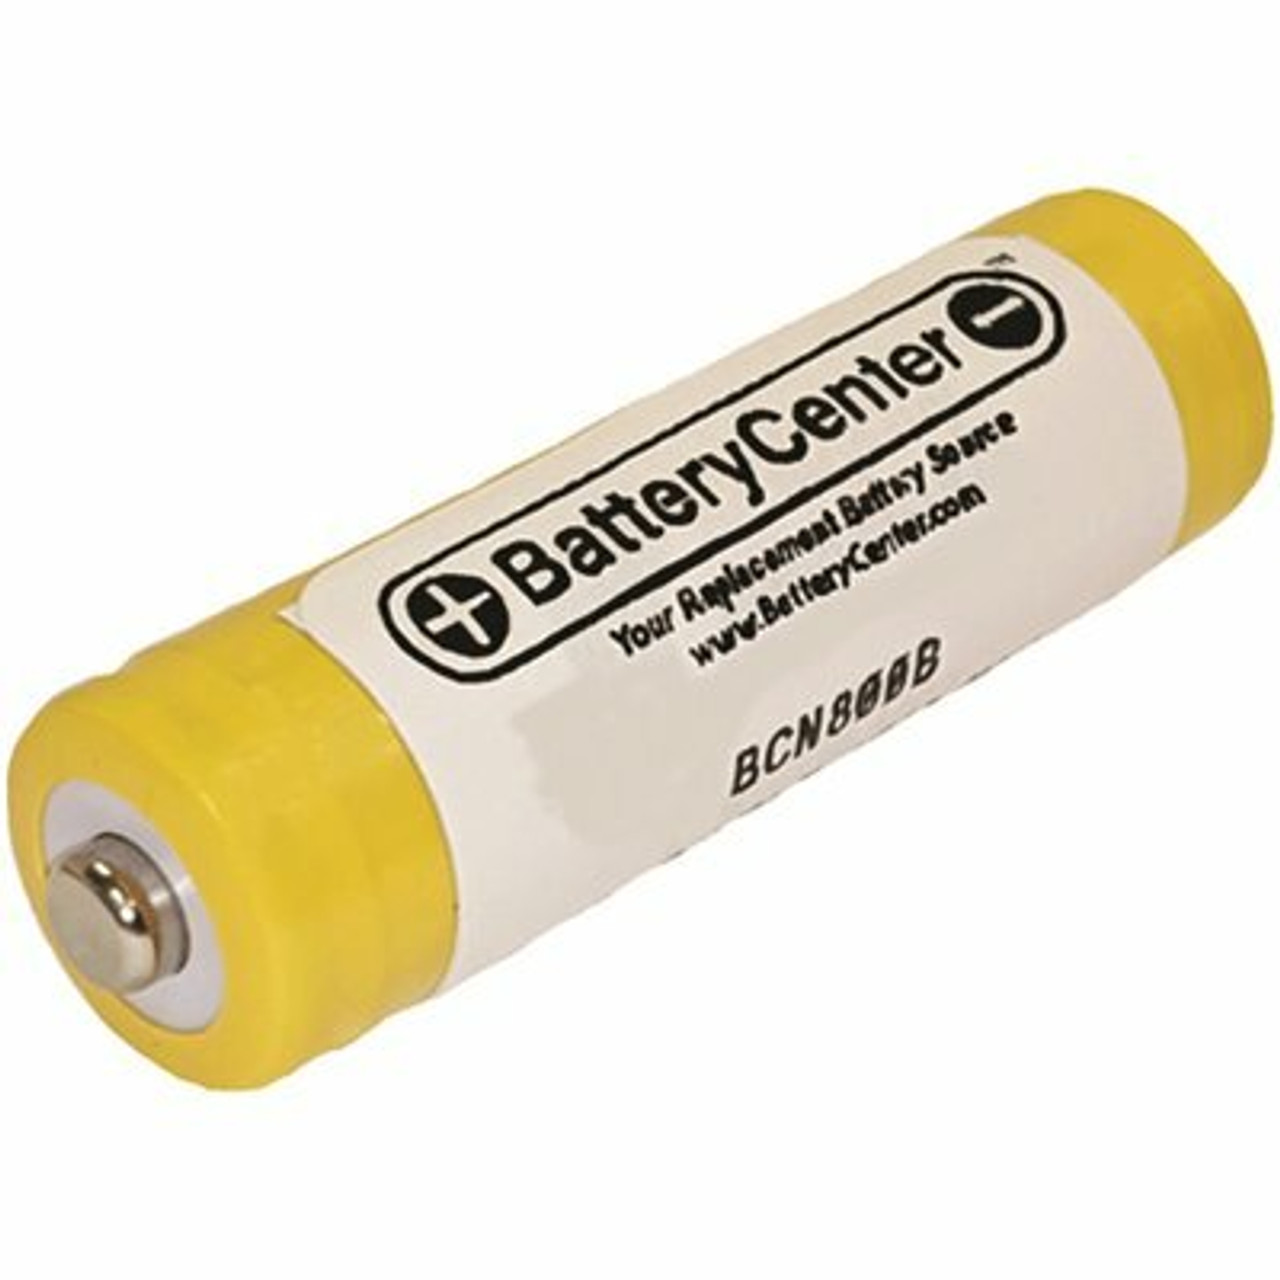 1.2-Volt 1000 Mah Replacement For The Cd-Aa1000A Cdaa1000A Nickel Cadmium Nicad Battery (Rechargeable)